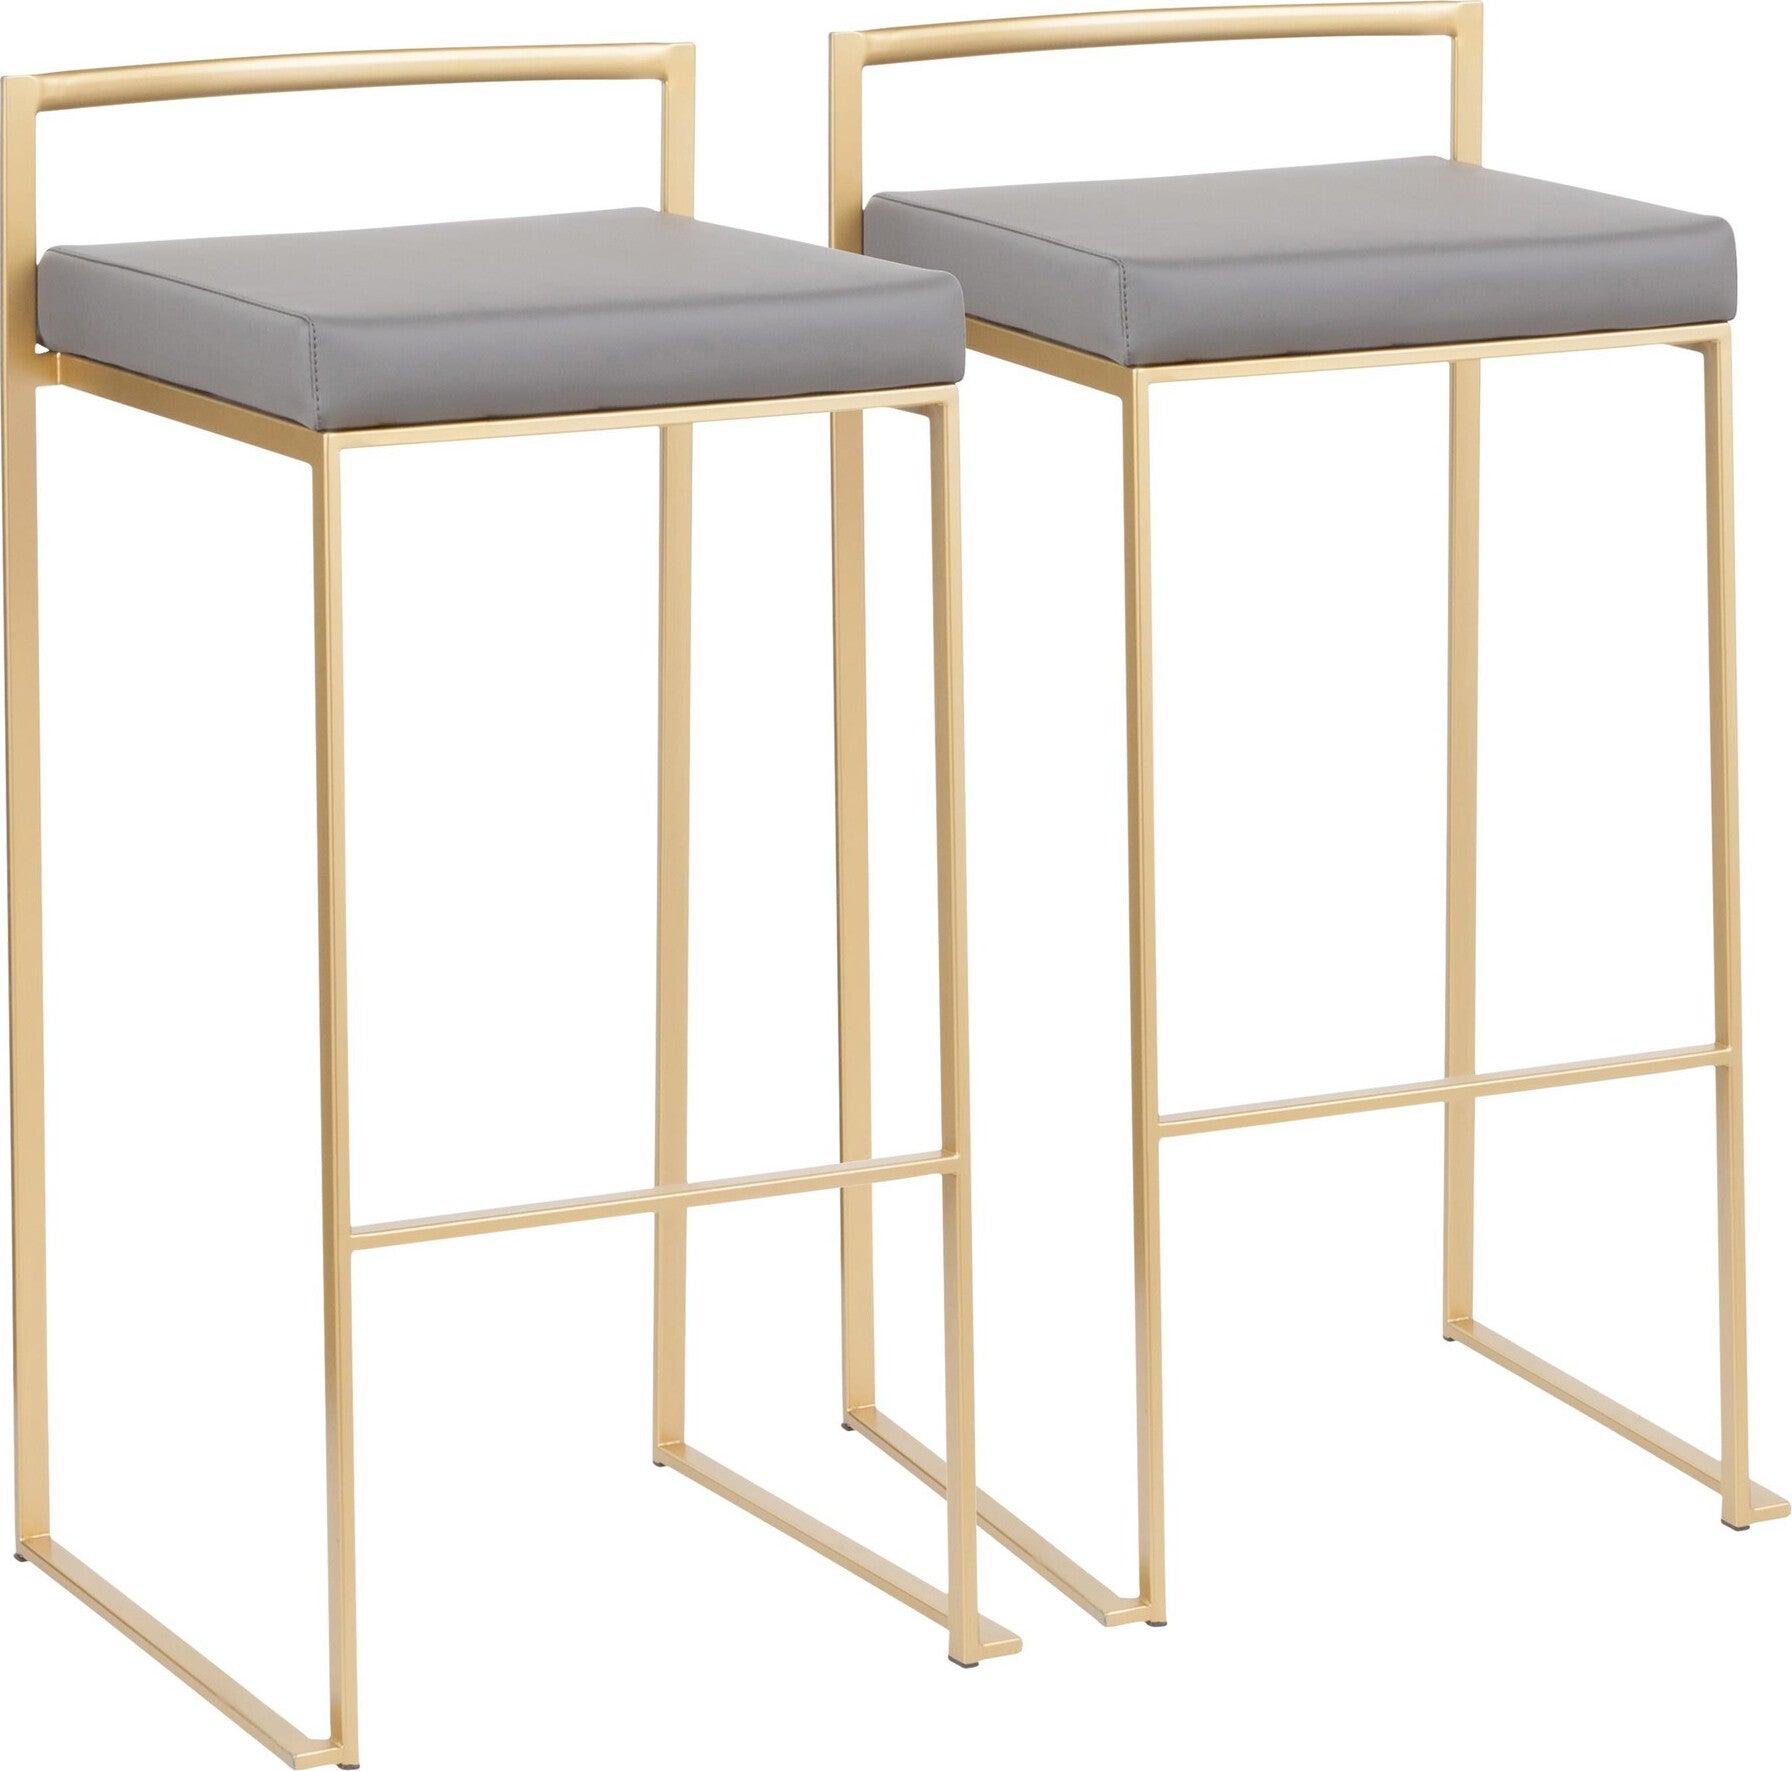 Lumisource Barstools - Fuji Contemporary Barstool in Gold with Grey Faux Leather (Set of 2)